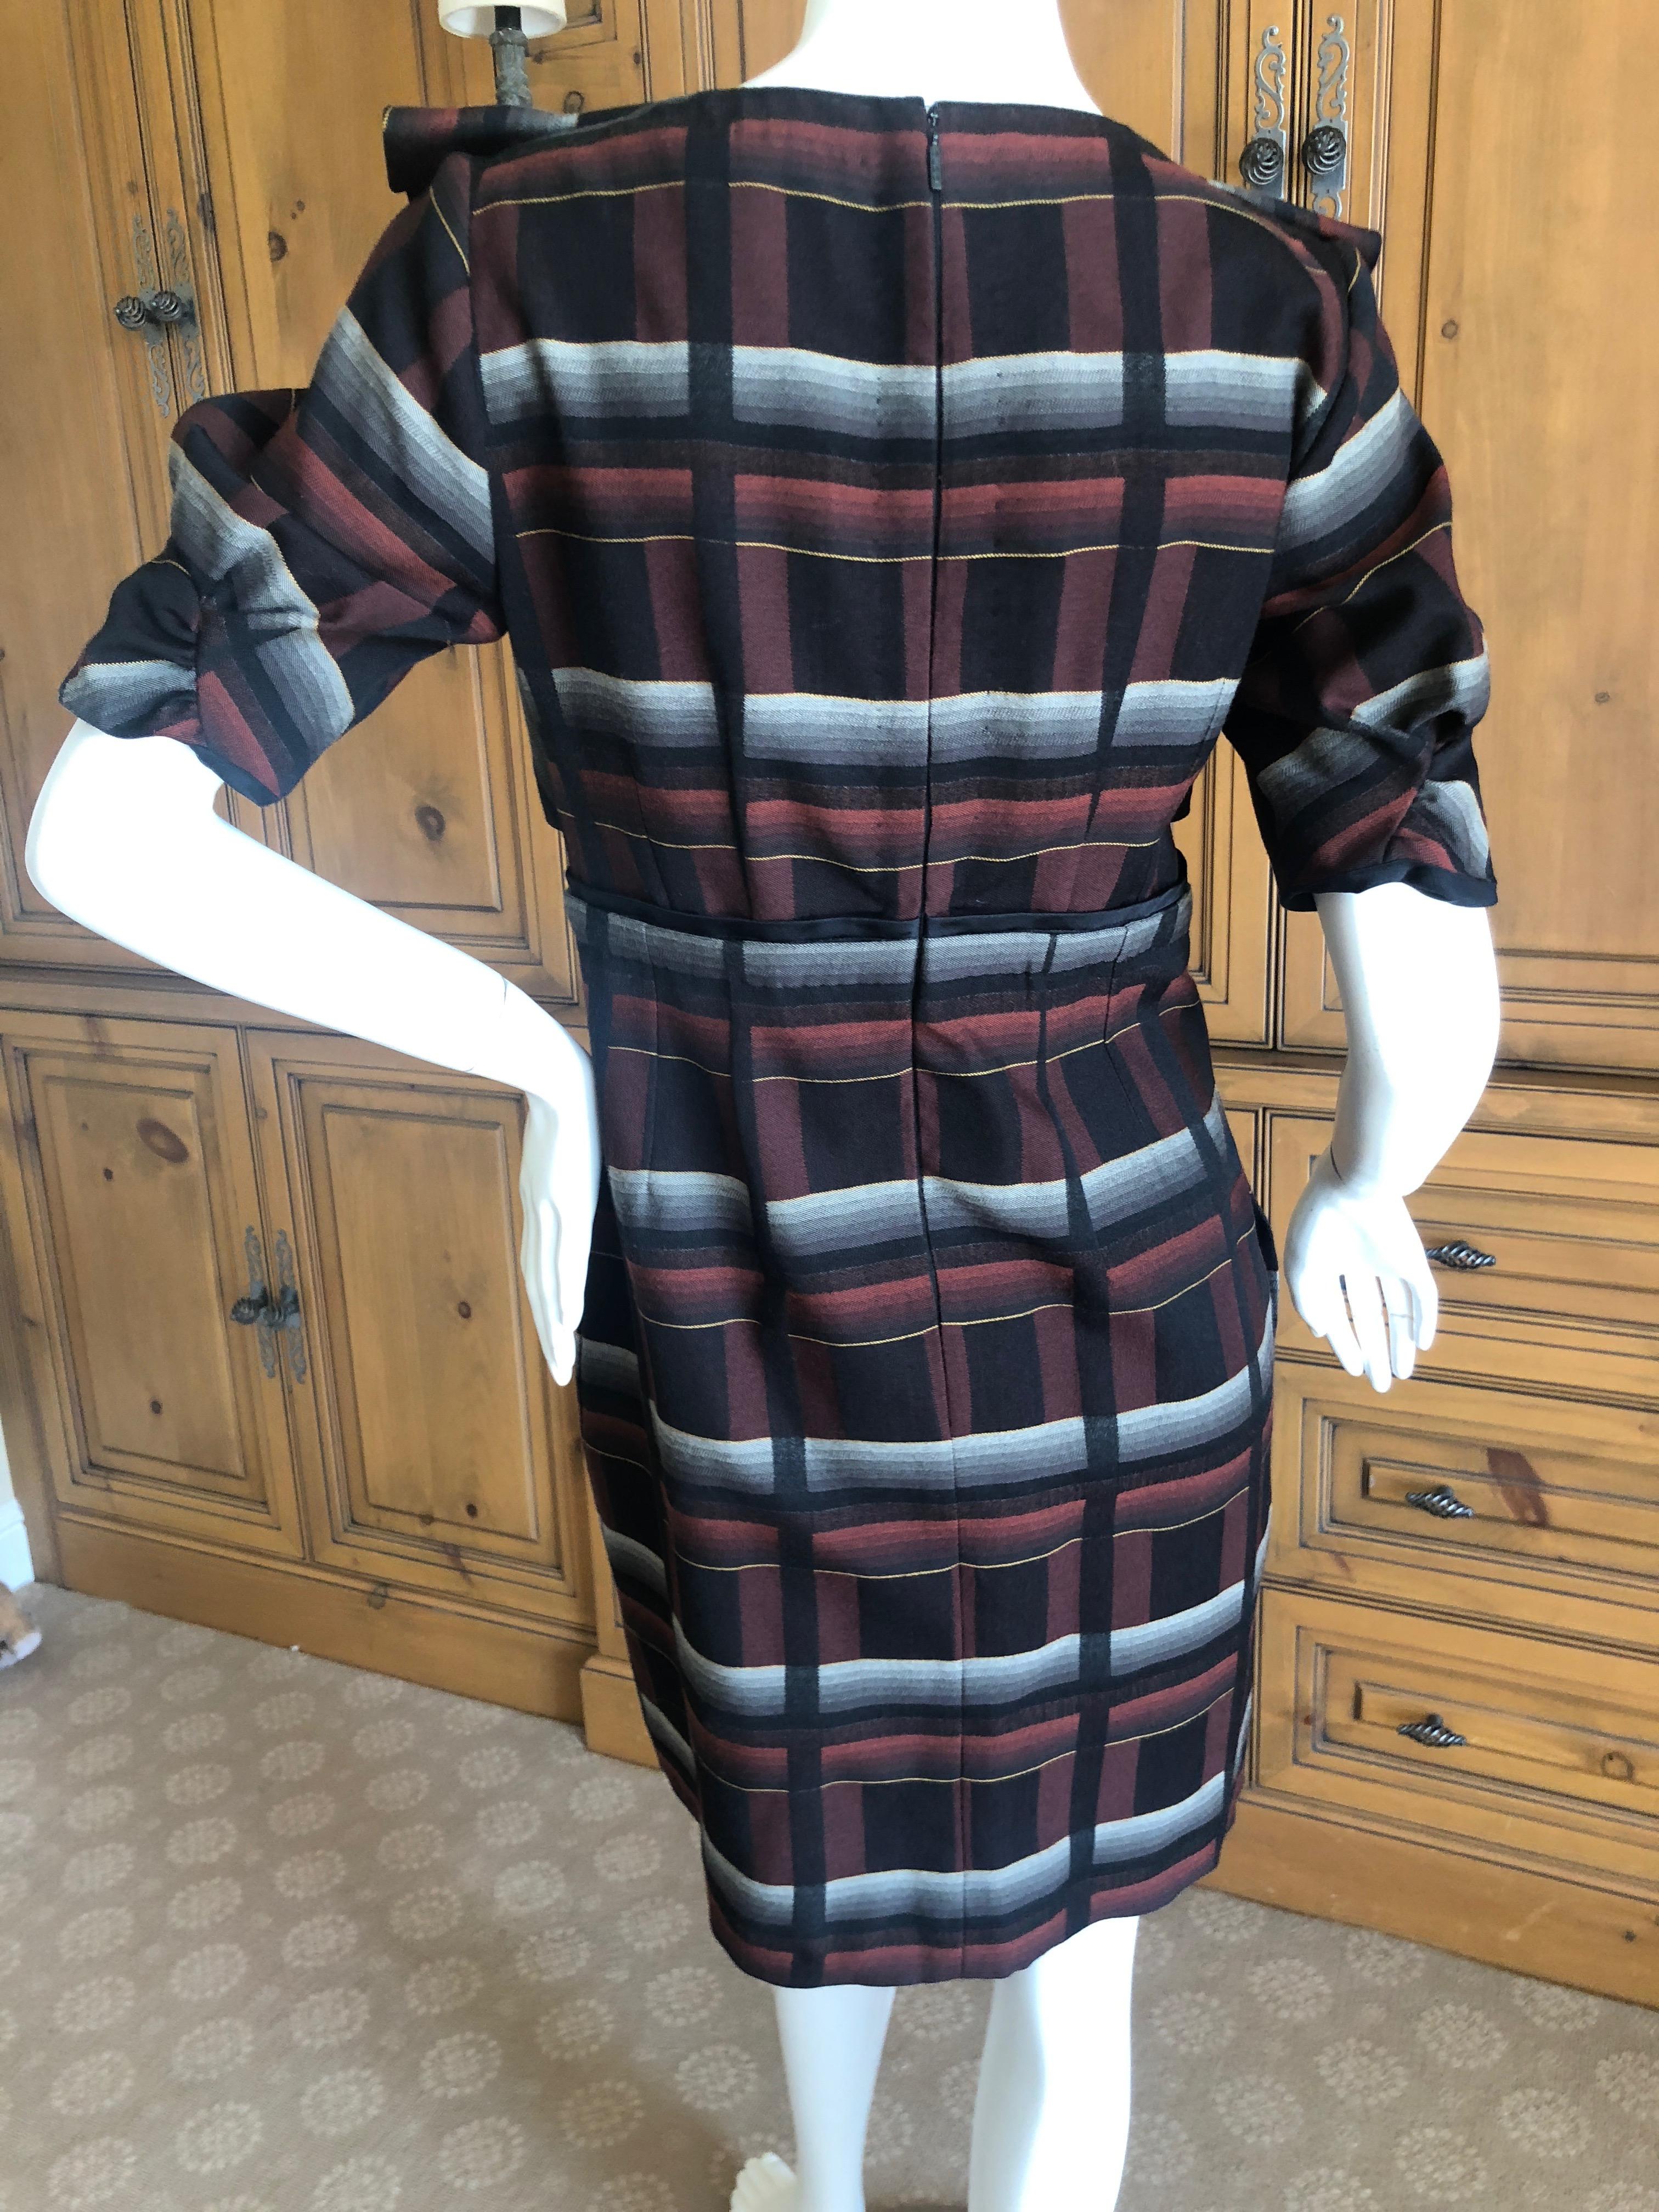 Gucci Origami Plaid Pattern Dress In Excellent Condition For Sale In Cloverdale, CA